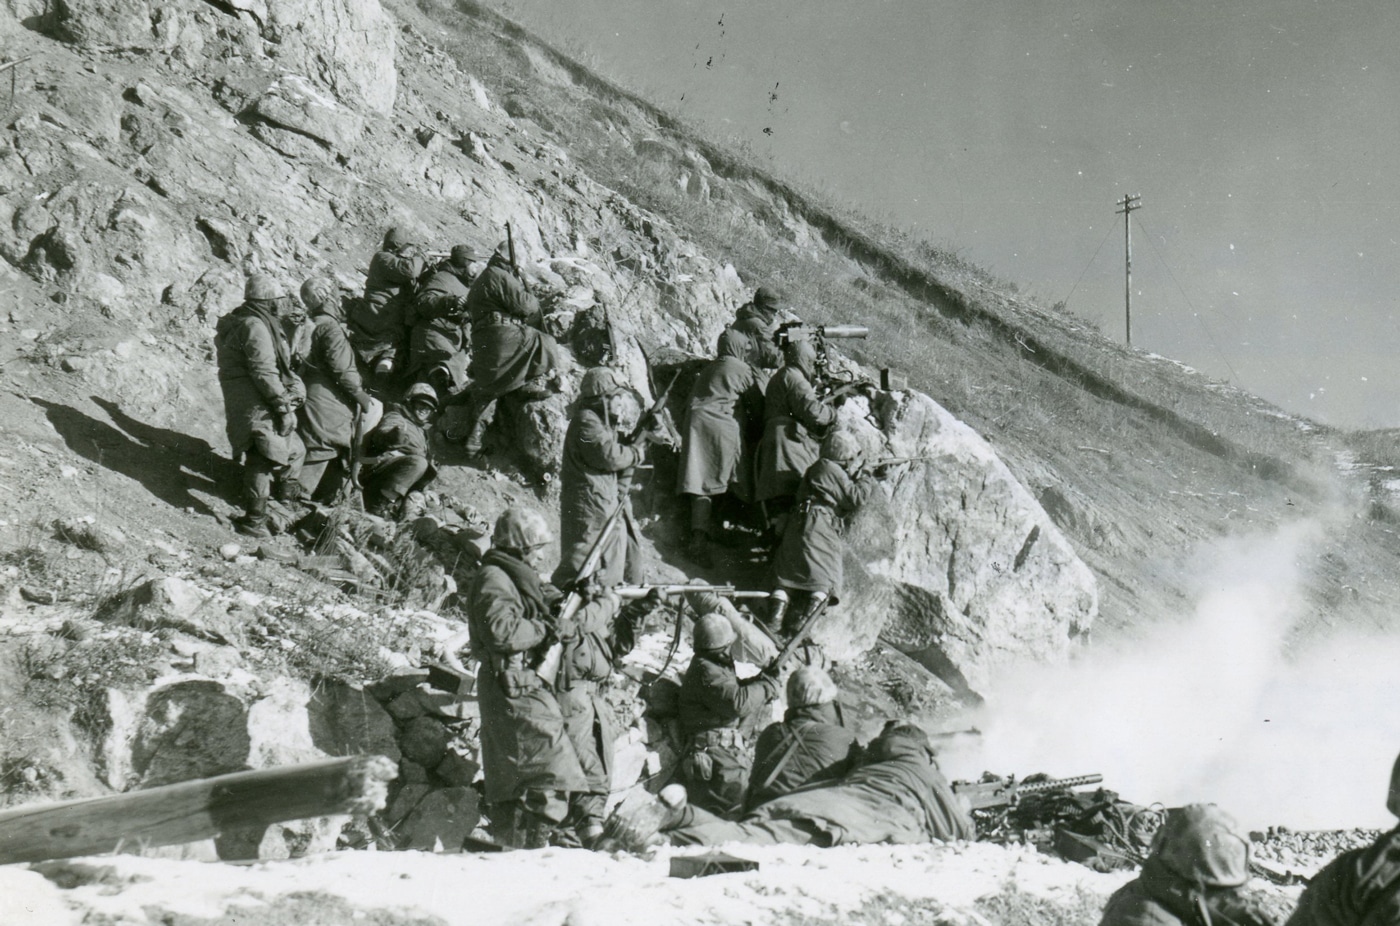 In this photo, we see Marines engage a Chinese roadblock near Hagaru-ri on December 6, 1950. The Marines helped evacuate UN forces including those from the X Corps Eith Army and others around Chosin.